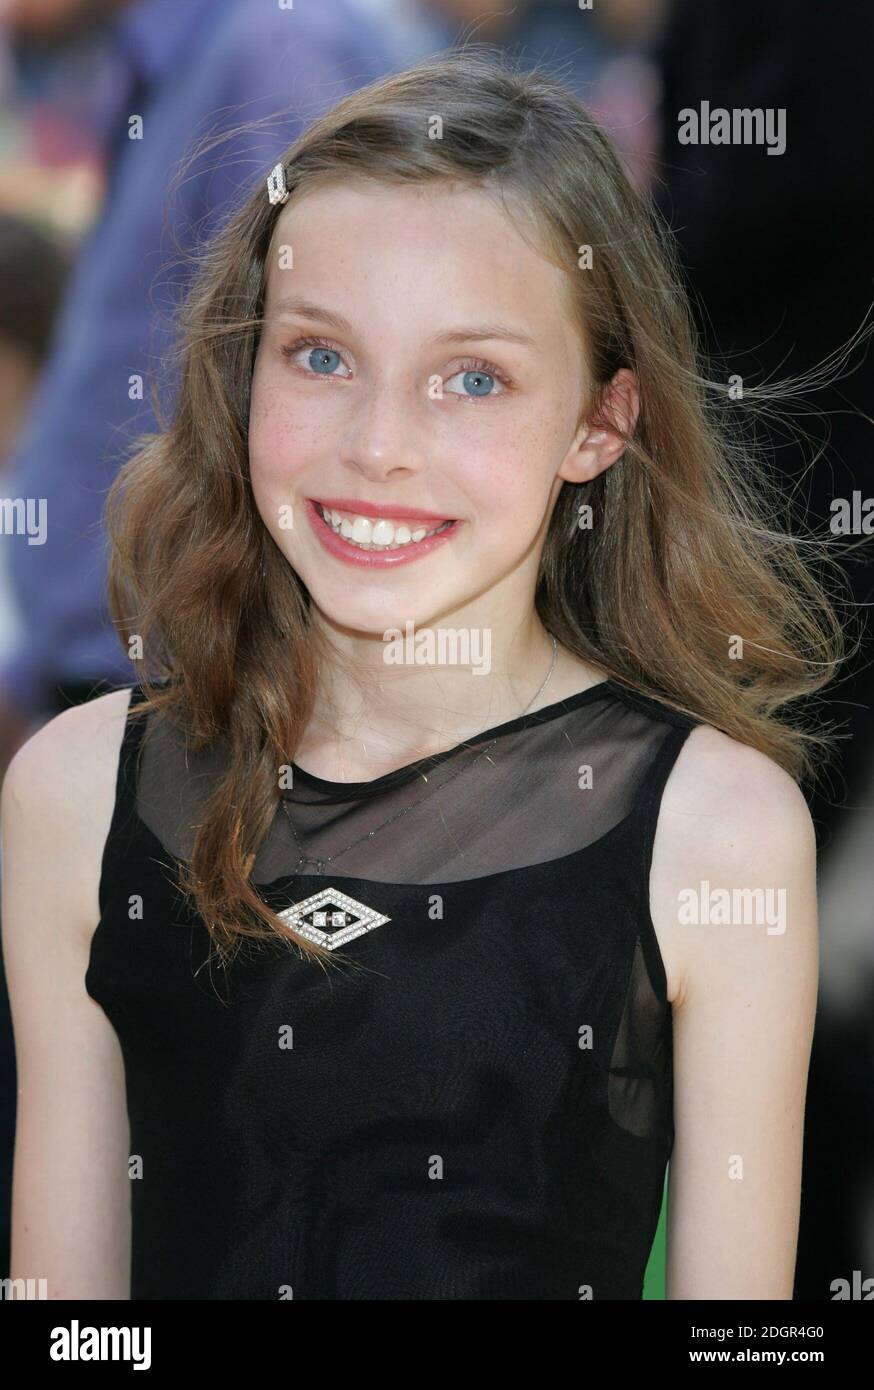 Julia Winter Arriving At The Charlie And The Chocolate Factory Uk Premiere In Leicester Square London Doug Peters Allactiondigital Com Stock Photo Alamy